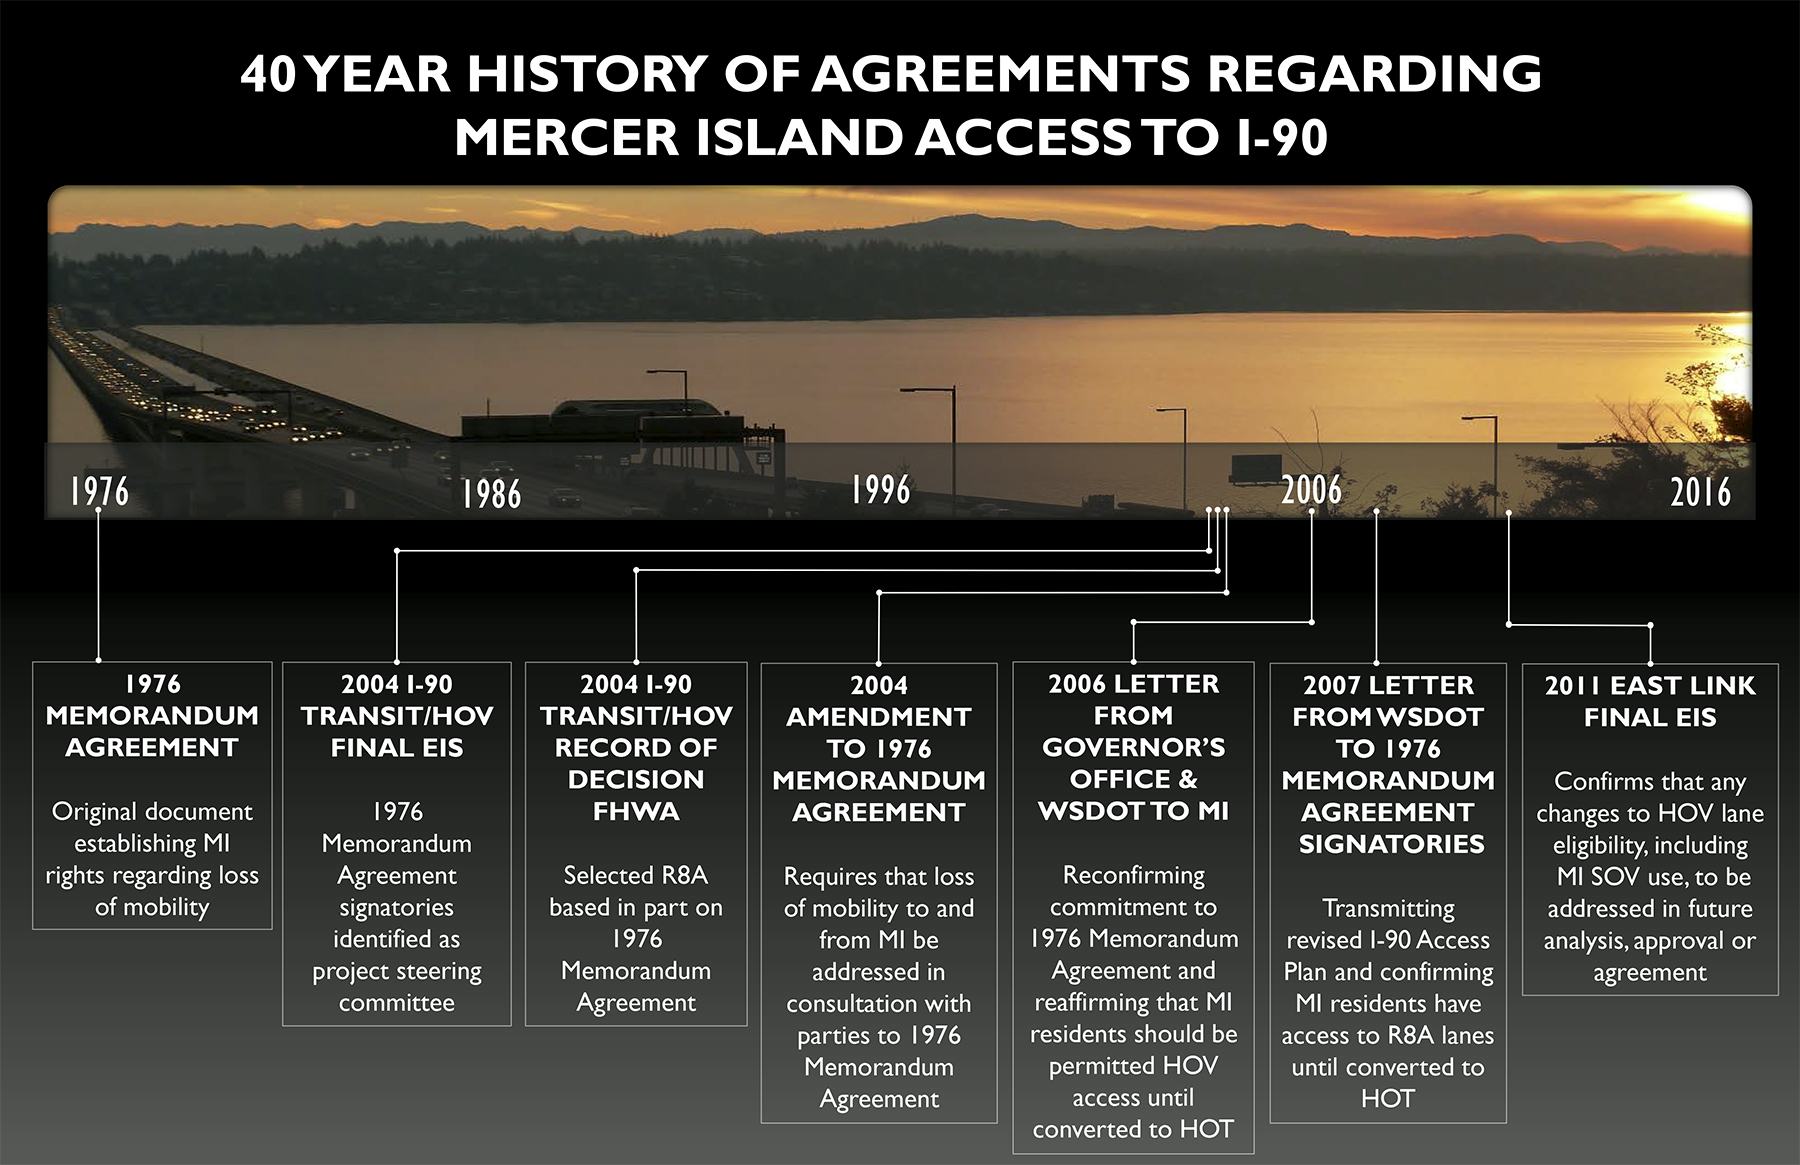 The city released a graphic summarizing its historic agreements regarding Interstate 90. Image courtesy of the city of Mercer Island.